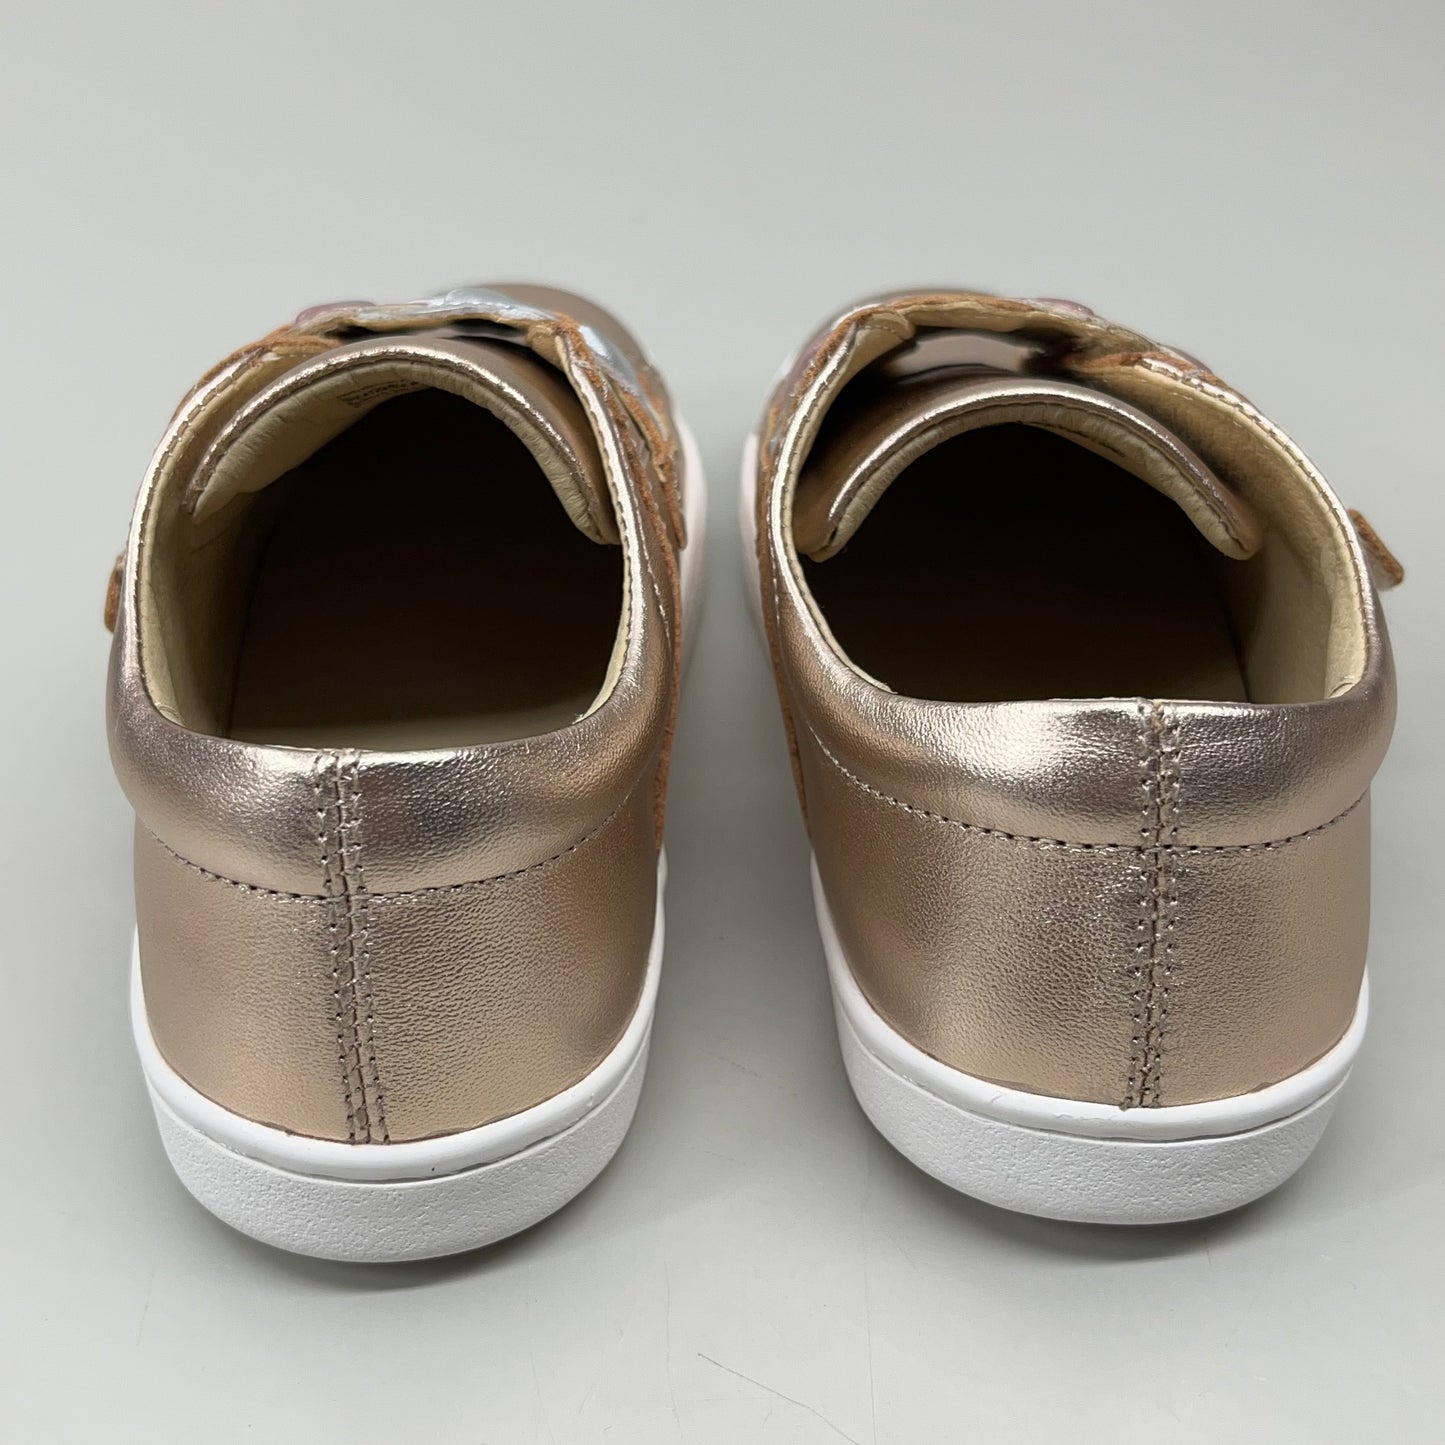 OLD SOLES Igster Sneakers Kid's Leather Shoe Sz 29 US 12 Copper/ Silver/ Pink Frost #6132